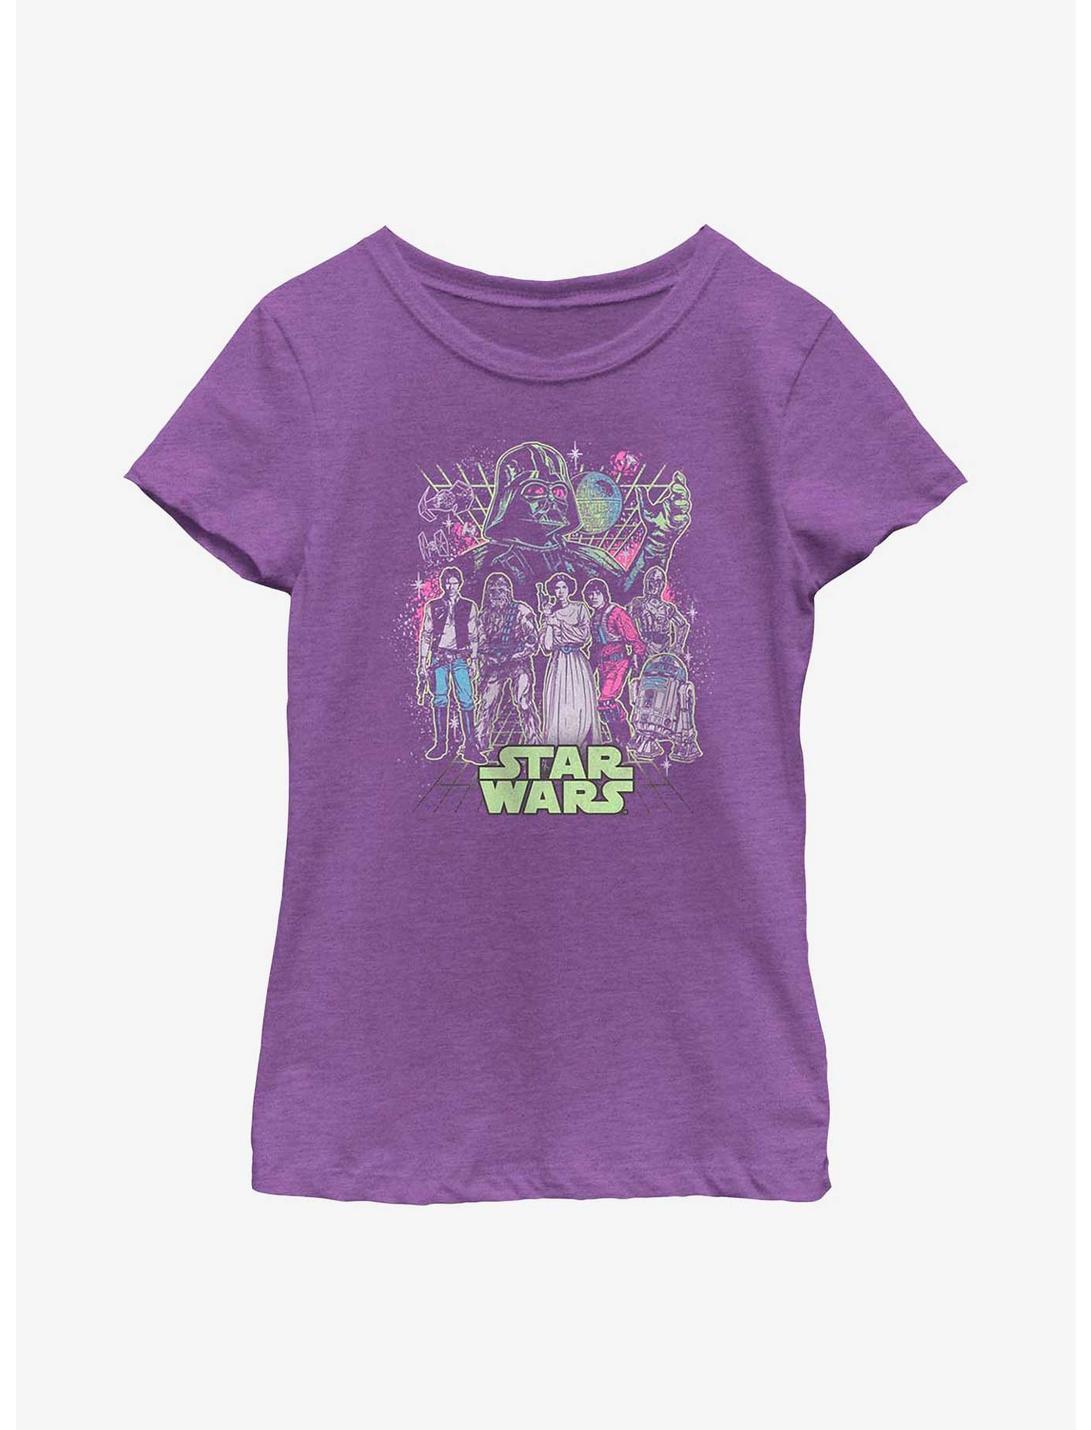 Star Wars Neon Grid Group  Youth Girls T-Shirt, PURPLE BERRY, hi-res